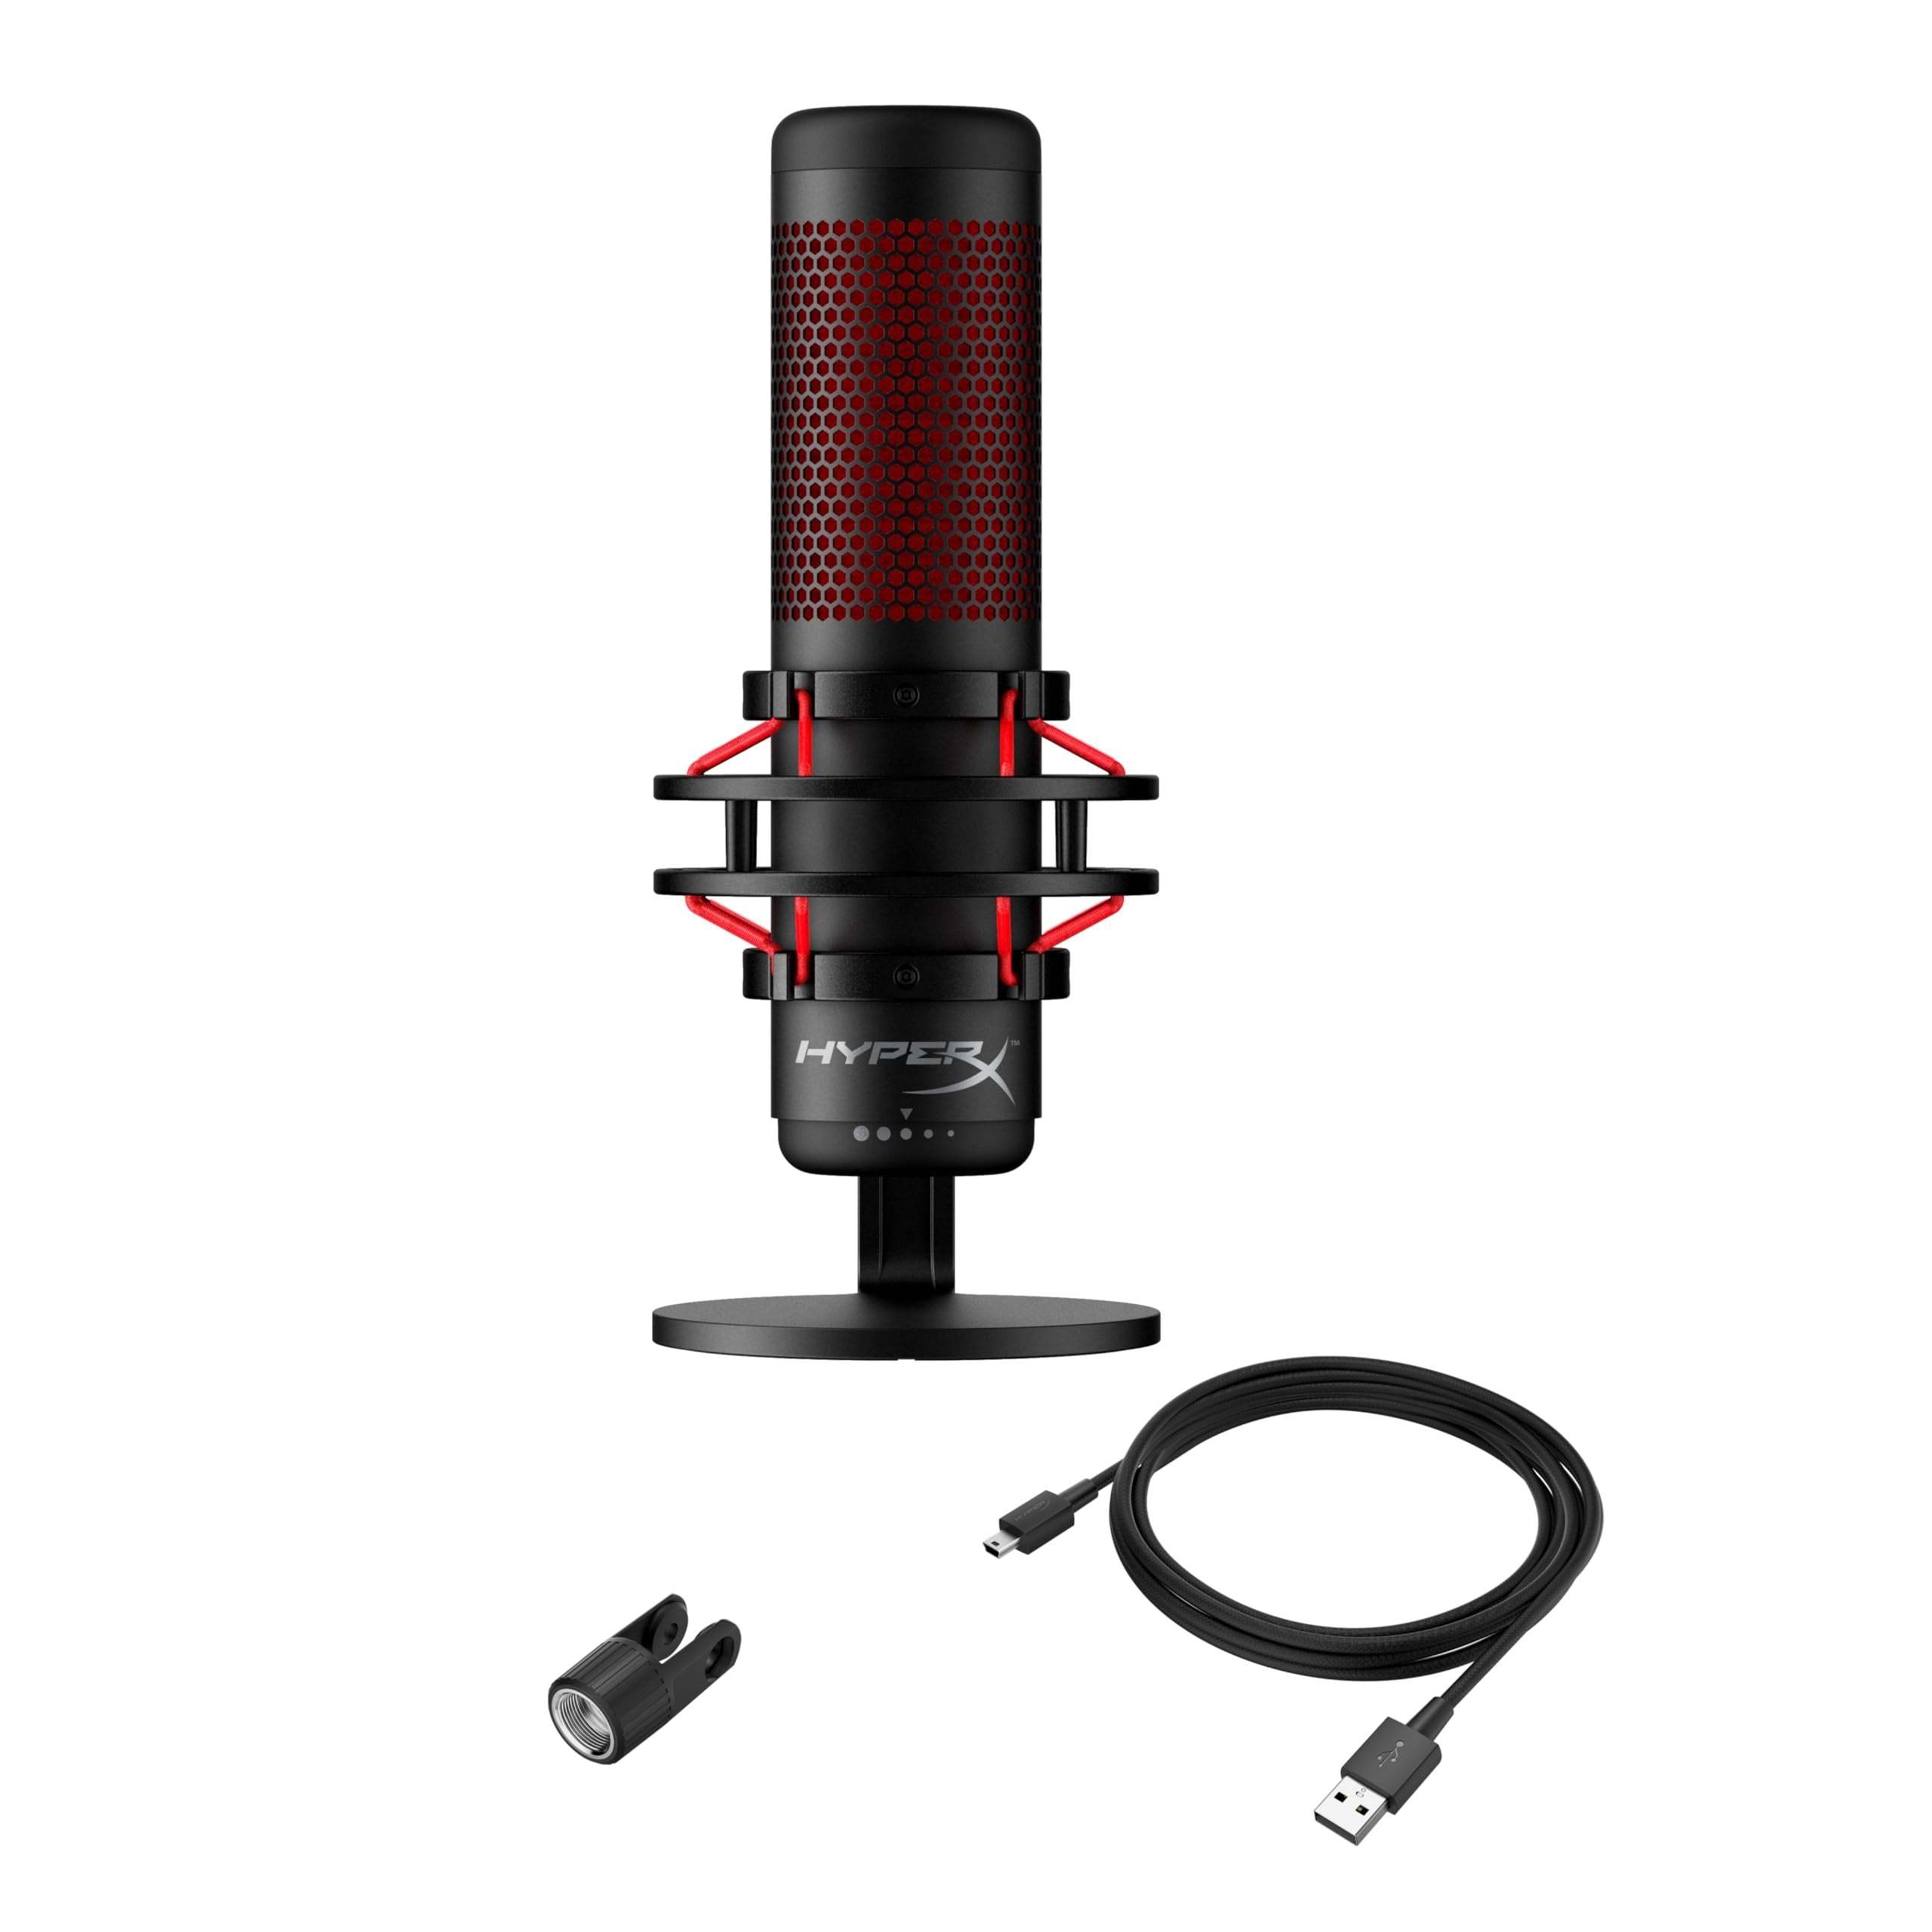 HyperX QuadCast - USB Condenser Gaming Microphone, for PC, PS4, PS5 and Mac, Anti-Vibration Shock Mount, Four Polar Patterns, Pop Filter, Gain Control, Podcasts, Twitch, YouTube, Discord, Red LED